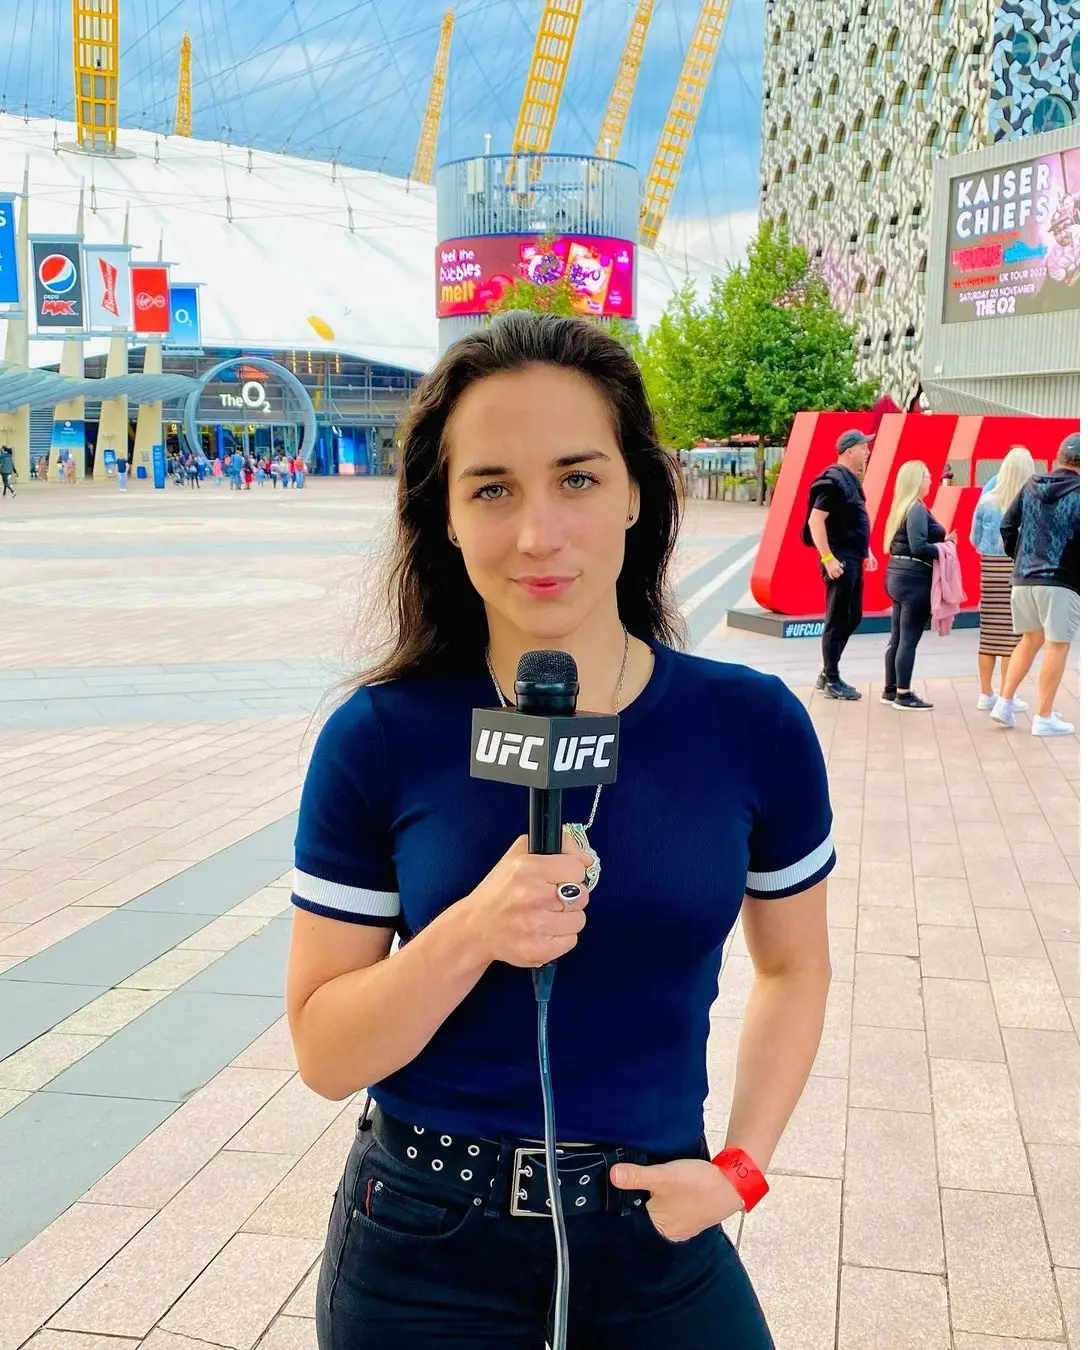 Veronica Macedo covering her first event for UFC Español in London